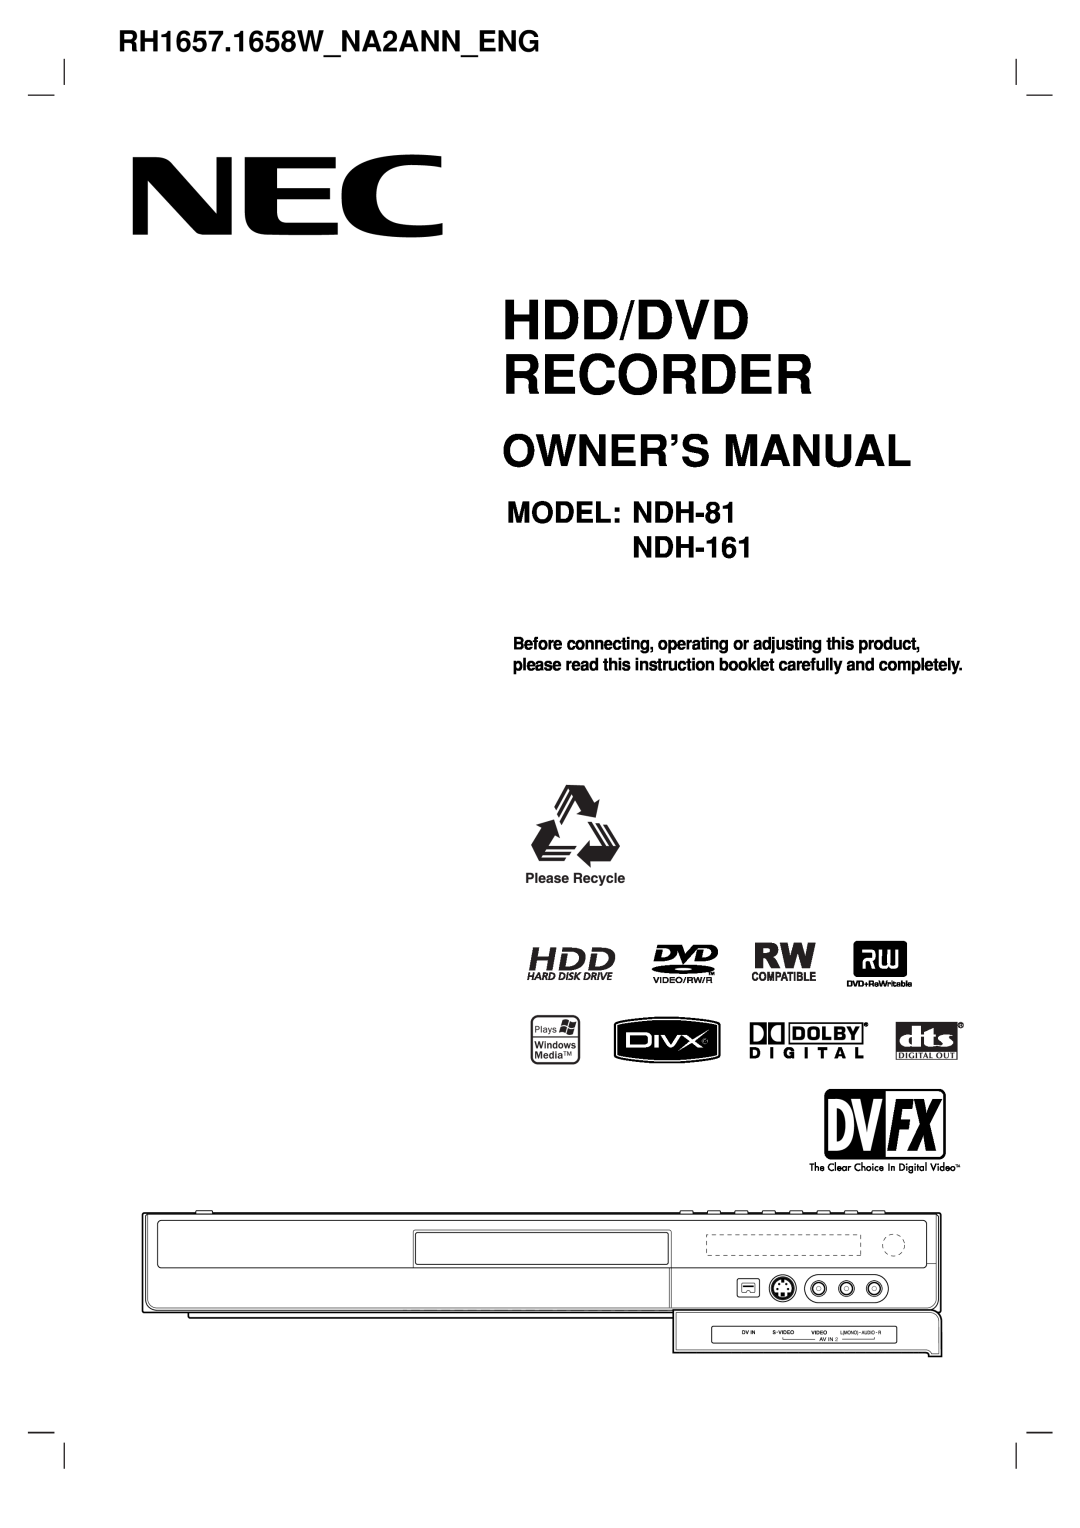 NEC owner manual Owner’S Manual, Hdd/Dvd Recorder, RH1657.1658WNA2ANNENG, MODEL NDH-81 NDH-161 